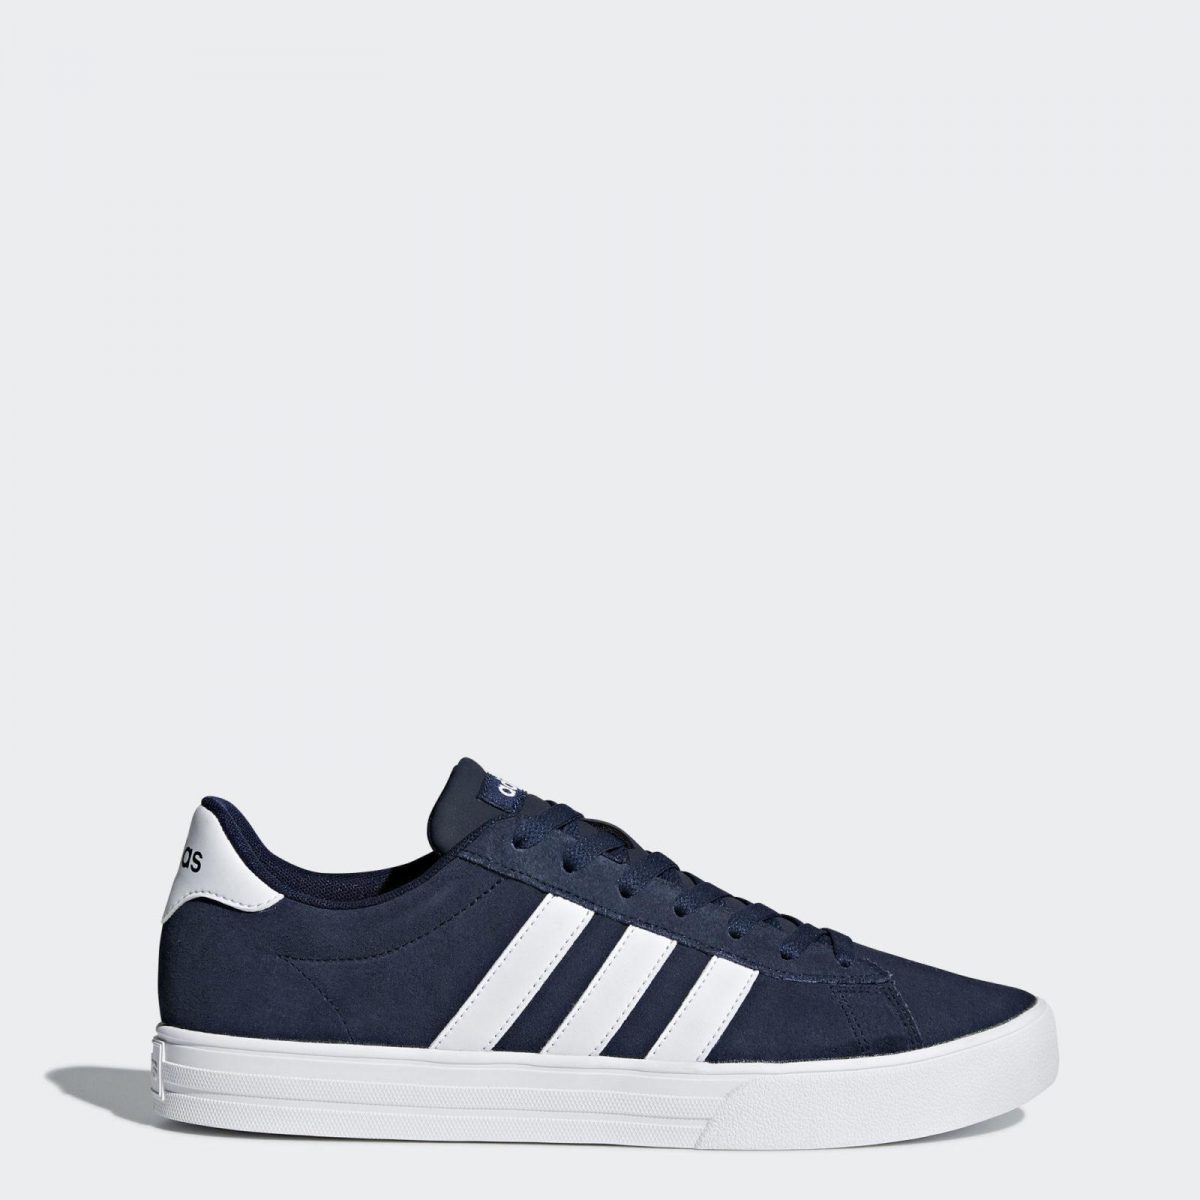 Daily 20 adidas (DB0271) - SNEAKER SEARCH